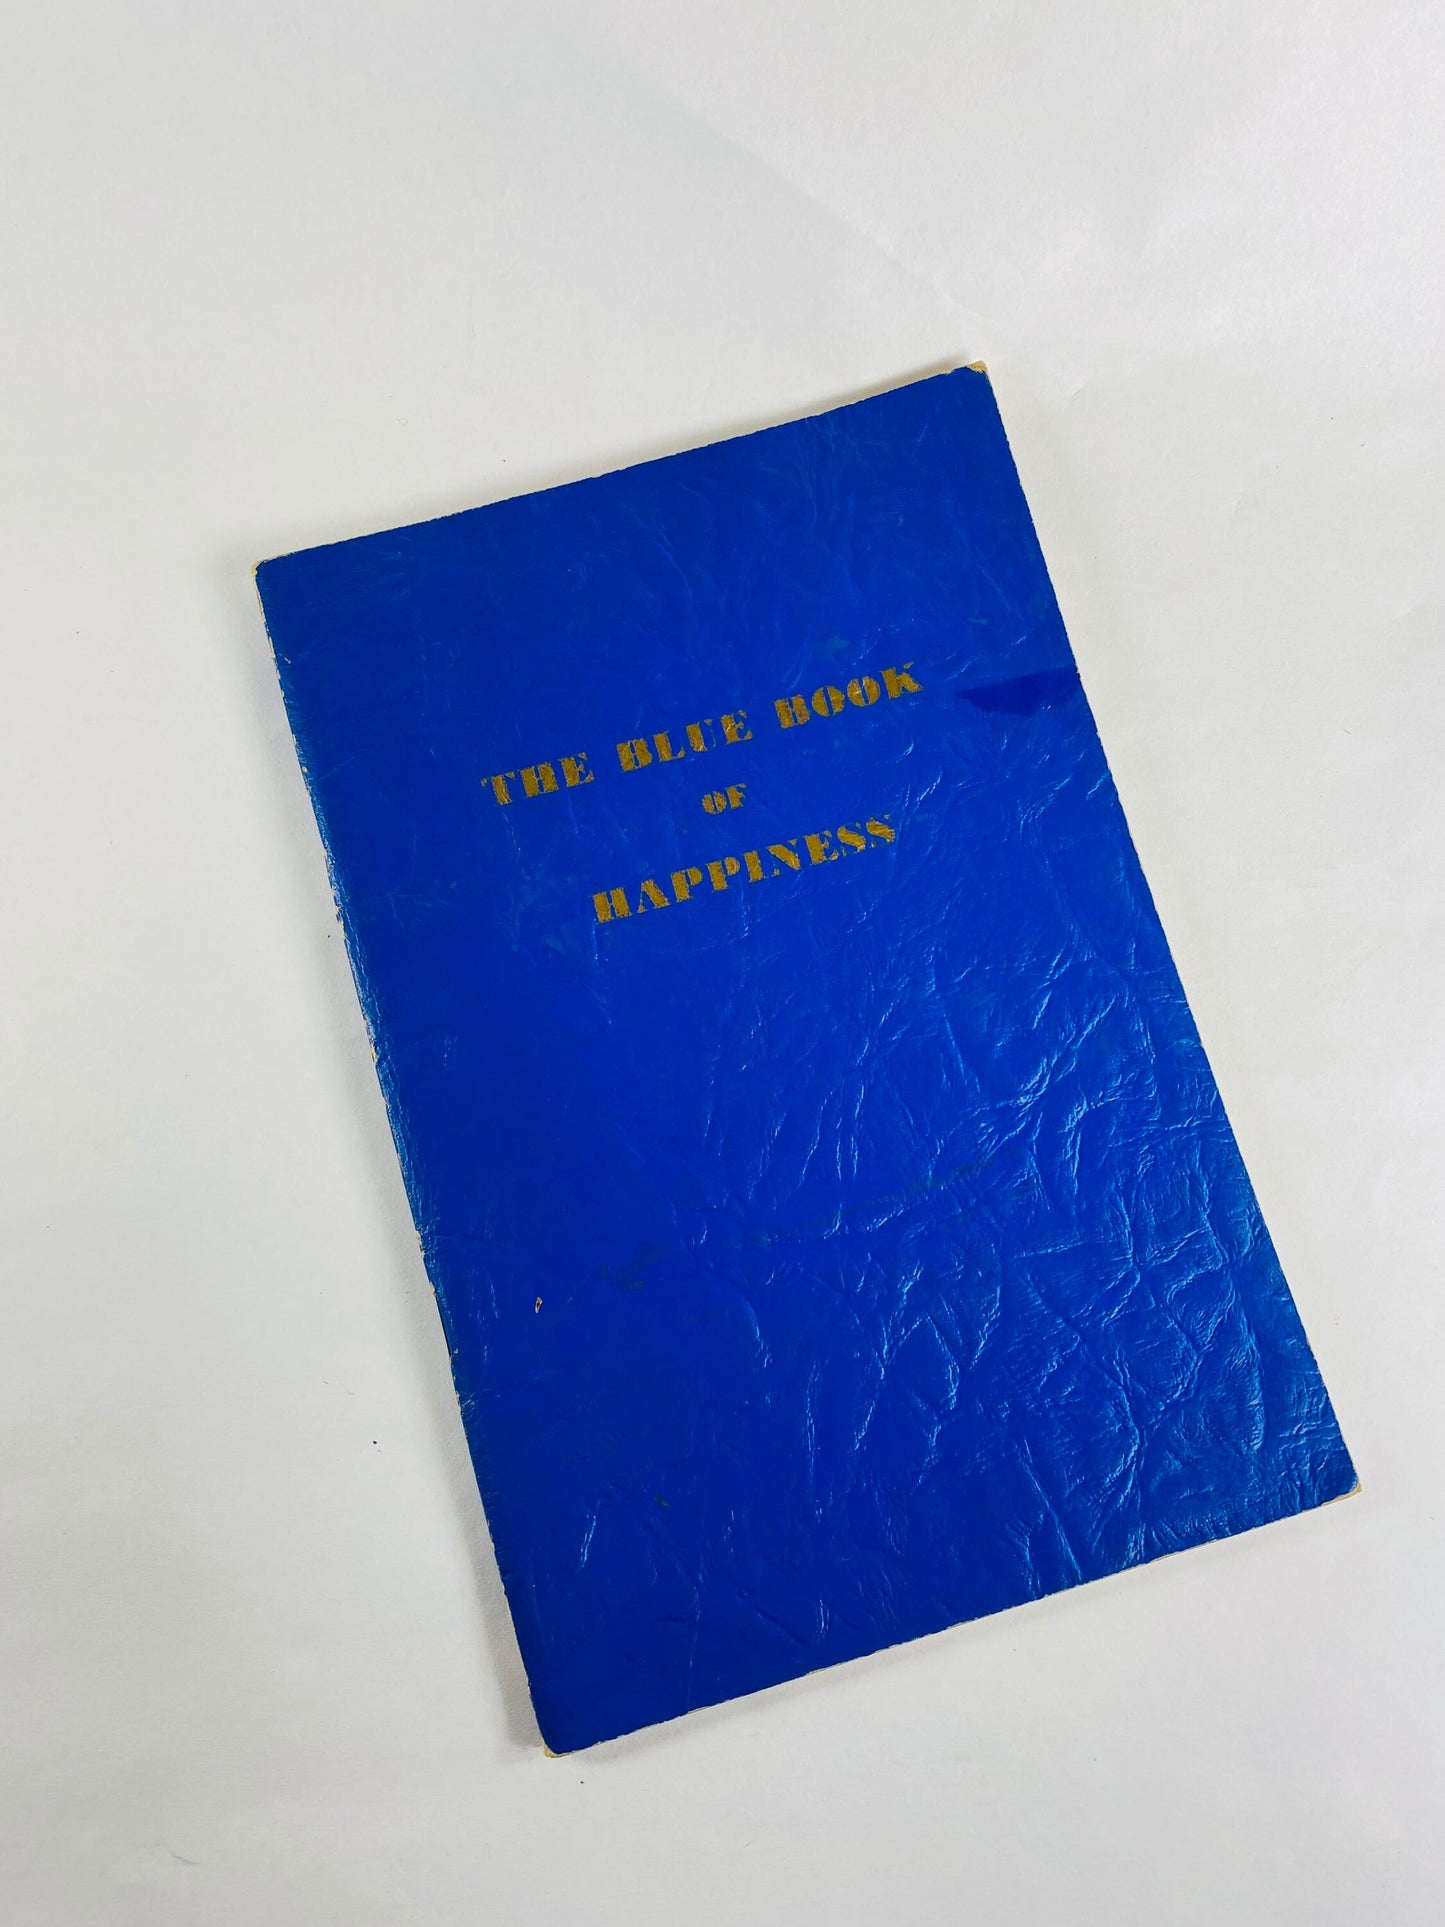 1951 Blue Book of Happiness FIRST EDITION Spiritual Guidance by Father John Doe Ralph Pfau Alcoholics Anonymous AA collector vintage gift